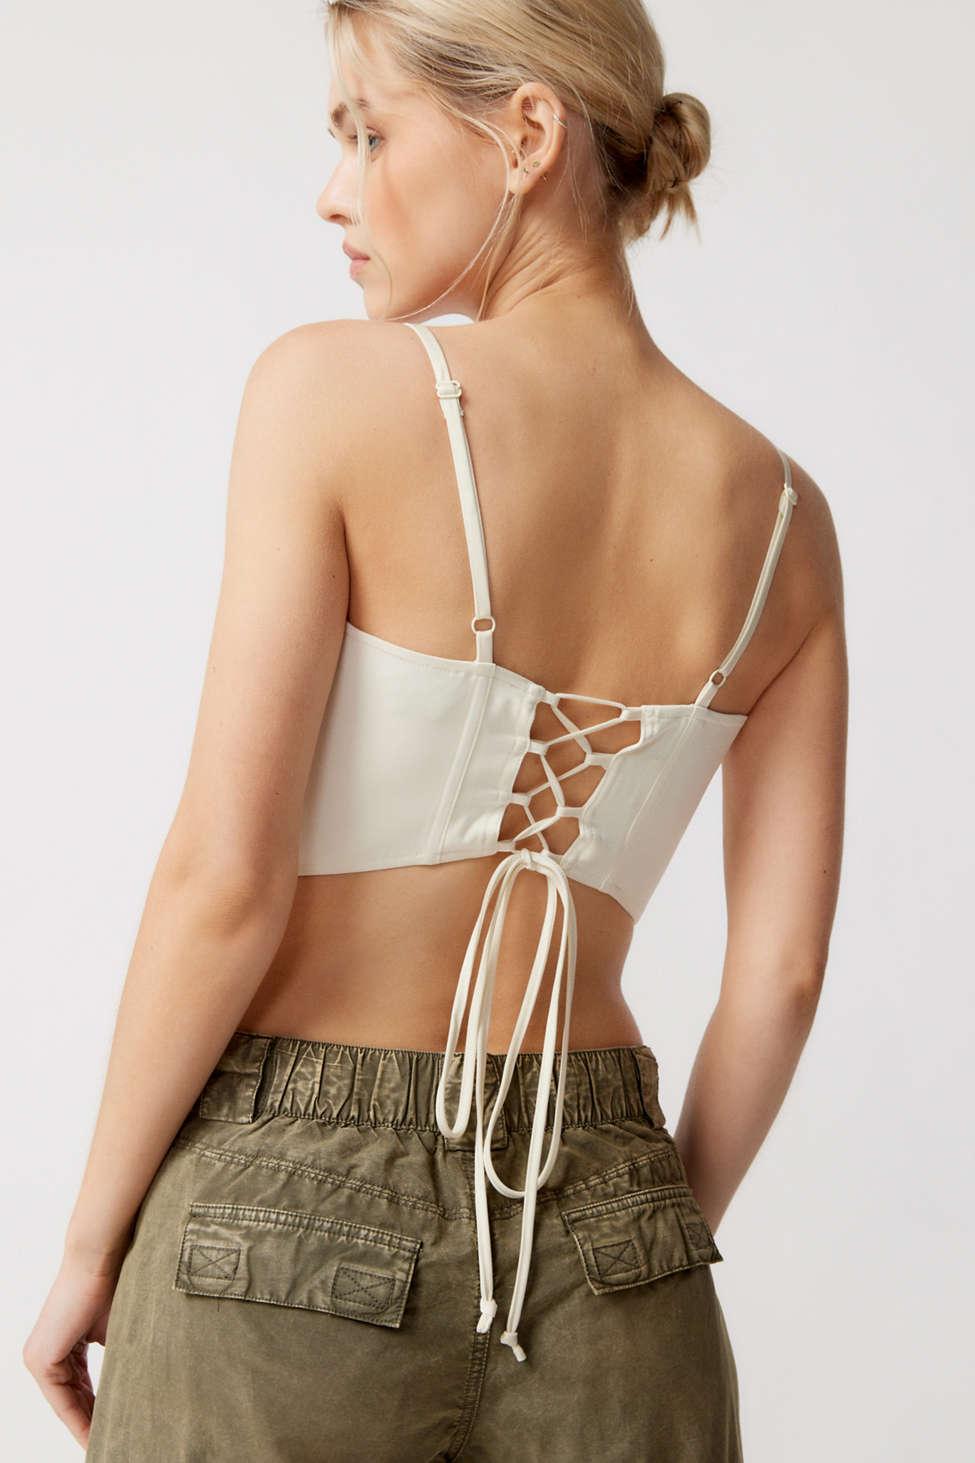 https://cdna.lystit.com/photos/urbanoutfitters/d0ff81c1/urban-outfitters-designer-White-Uo-Serene-Lace-up-Bustier-Cami.jpeg